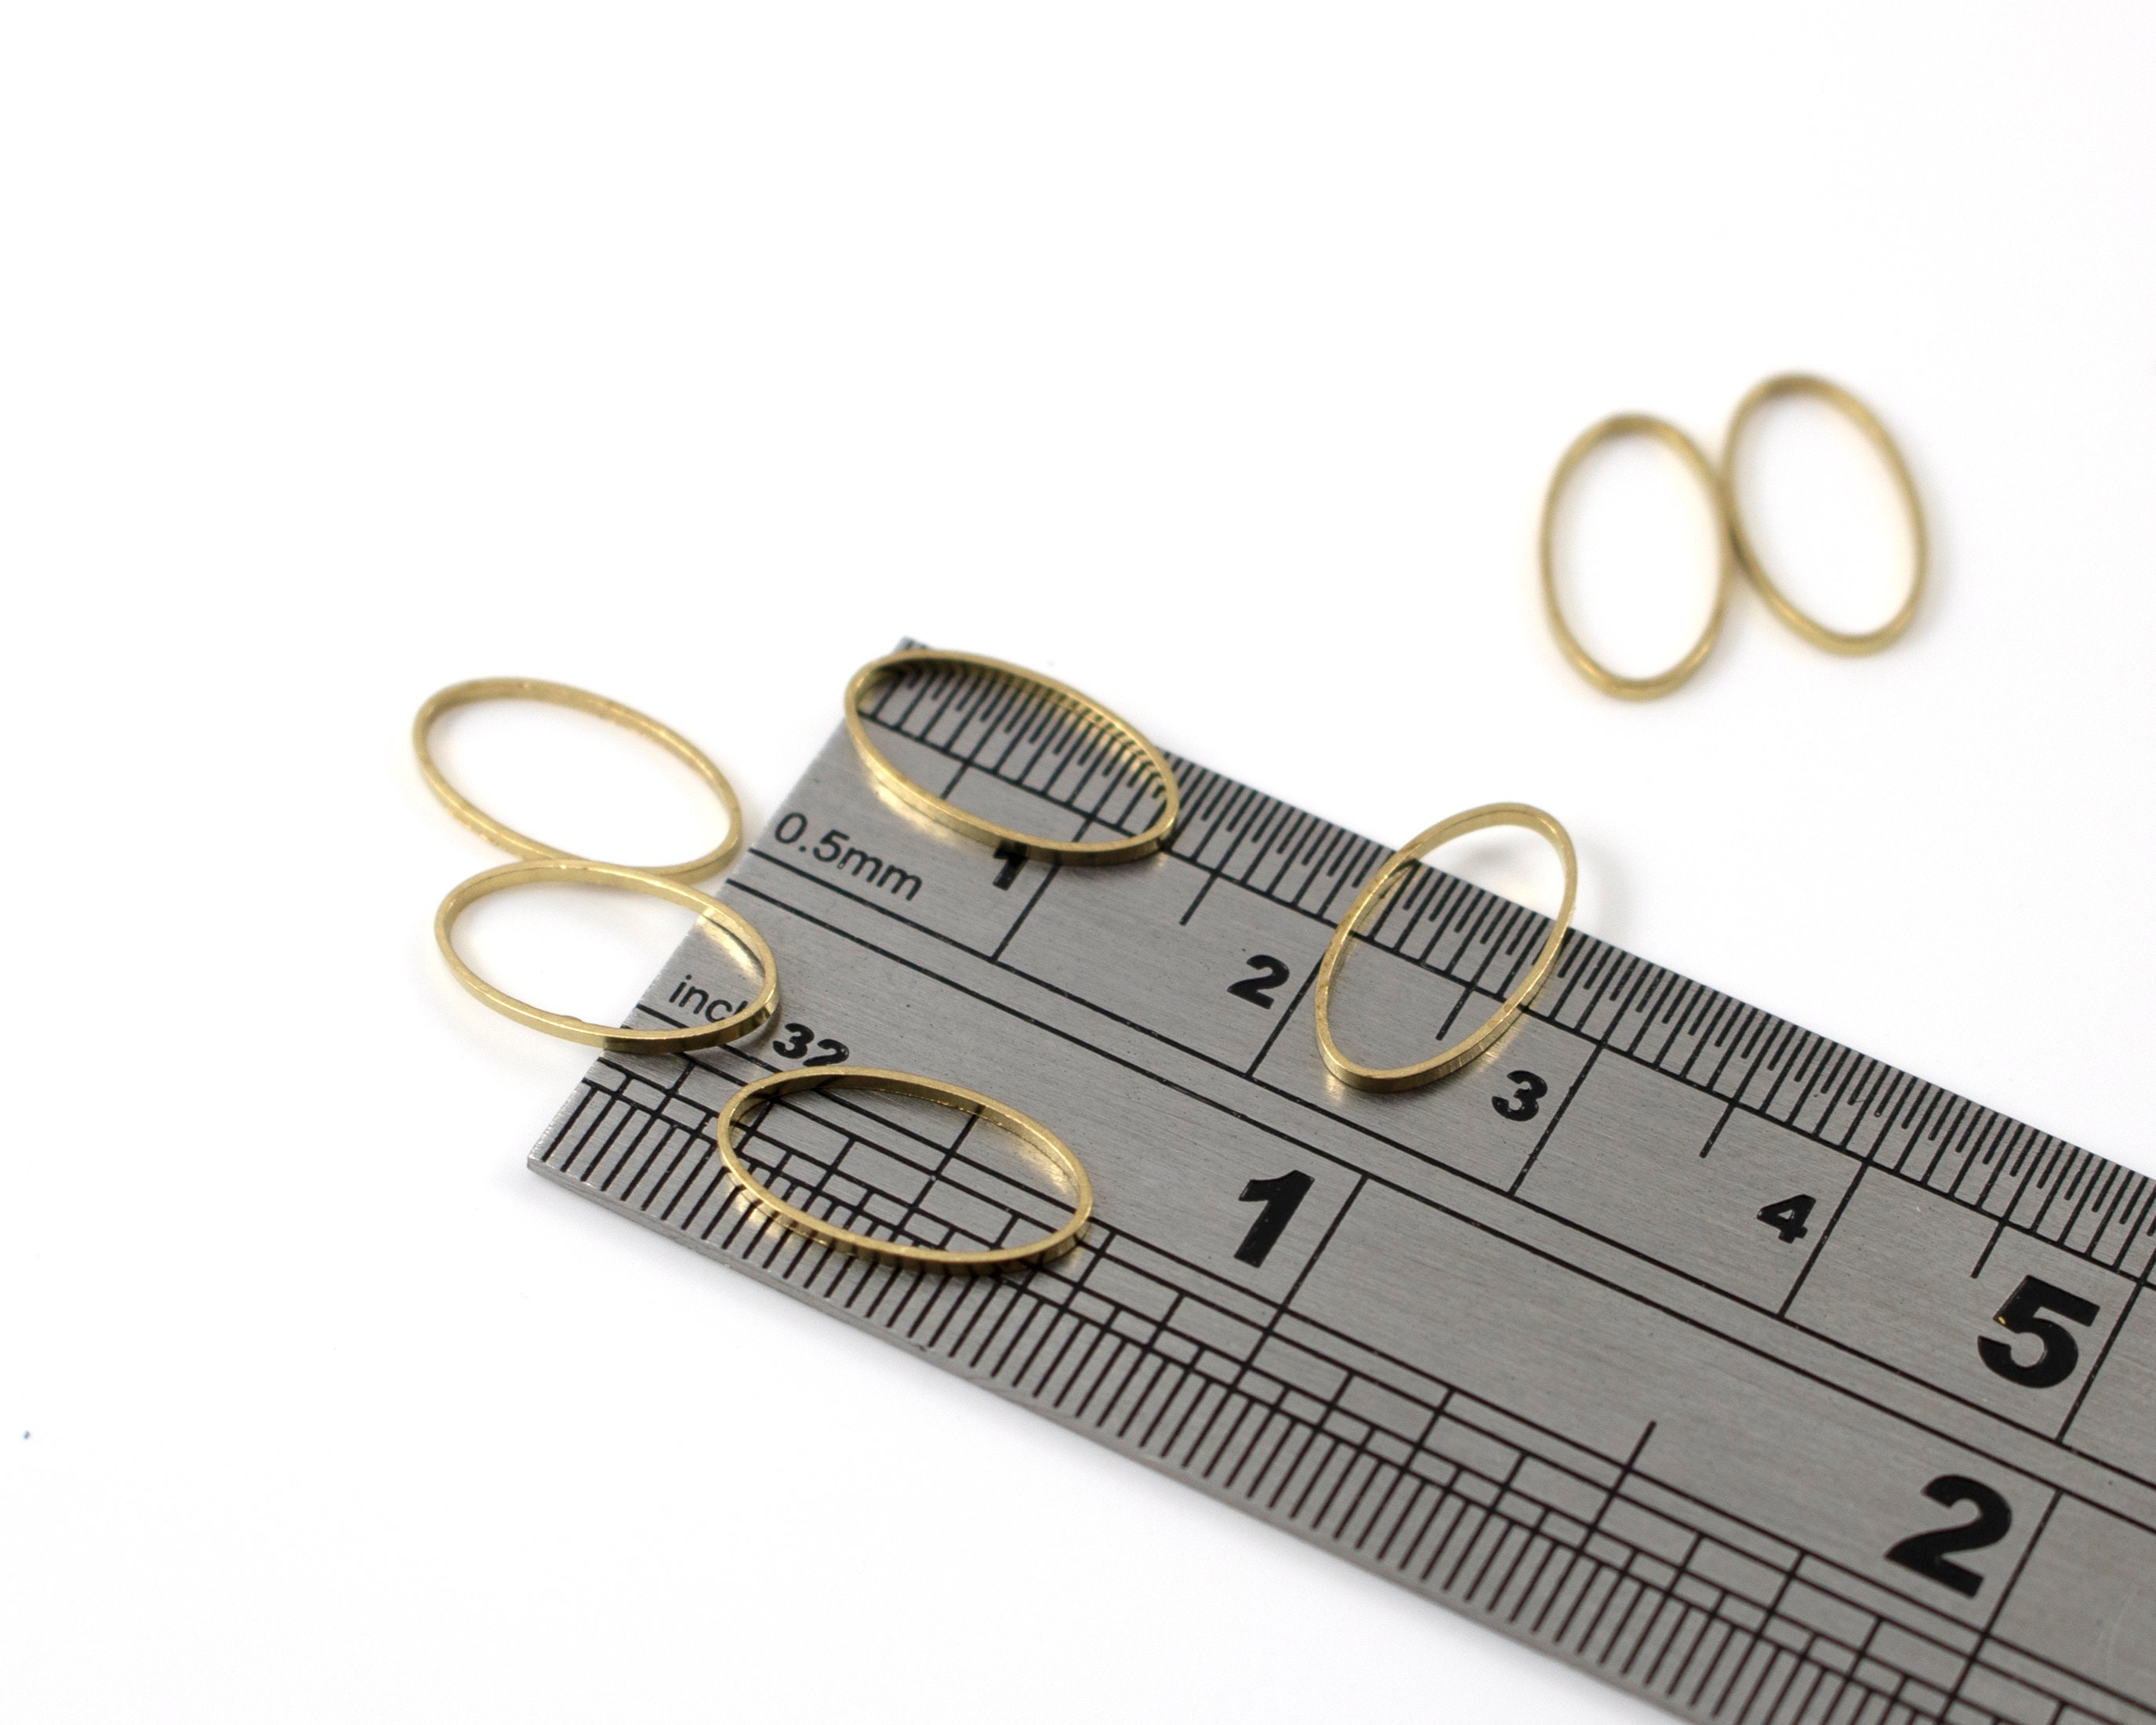 50pcs Silver Plated Flat Oval Jump Ring, Brass Oval Connectors